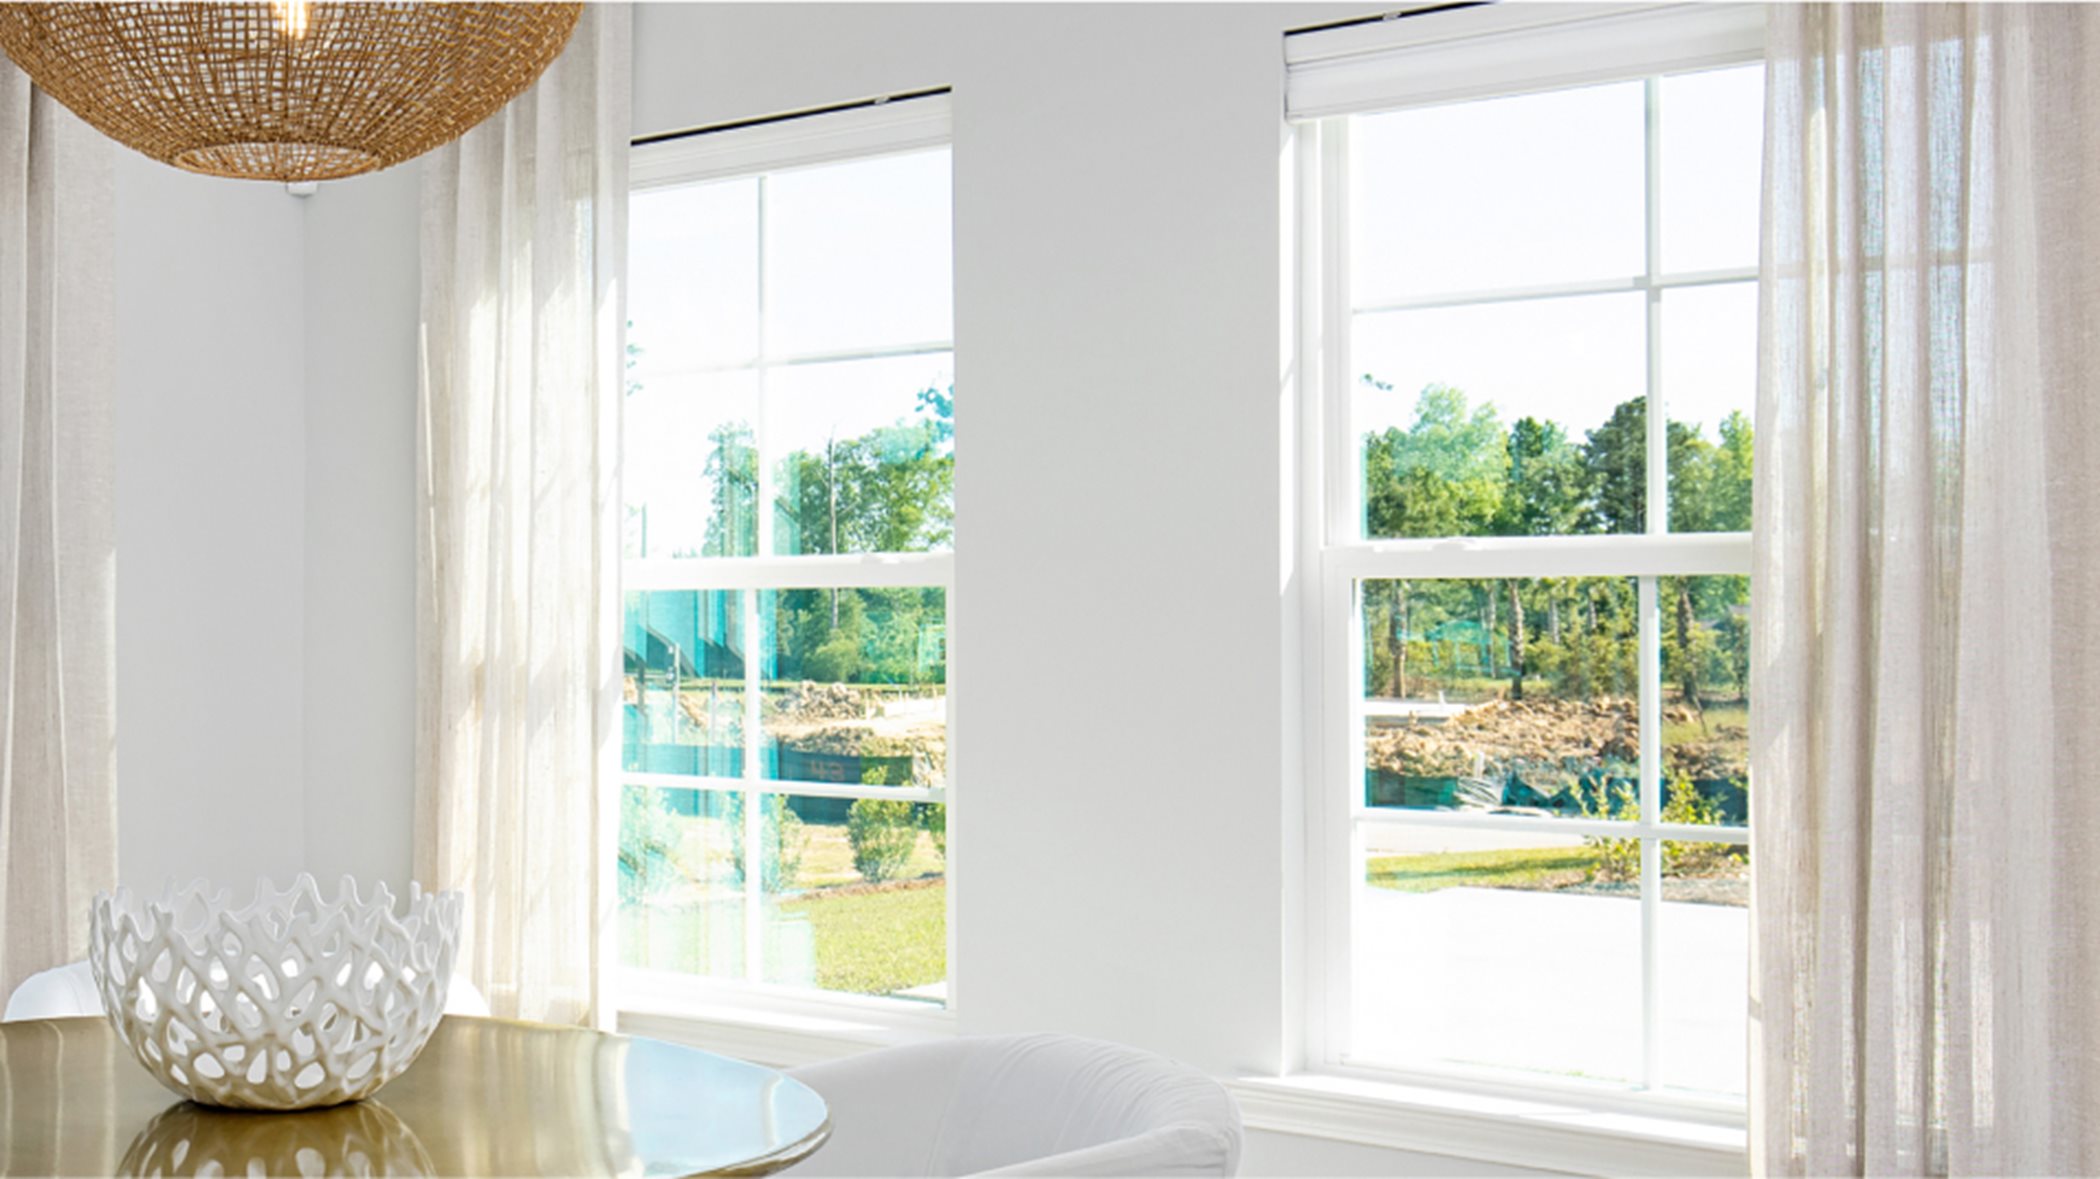 Low-E insulated and energy efficient windows